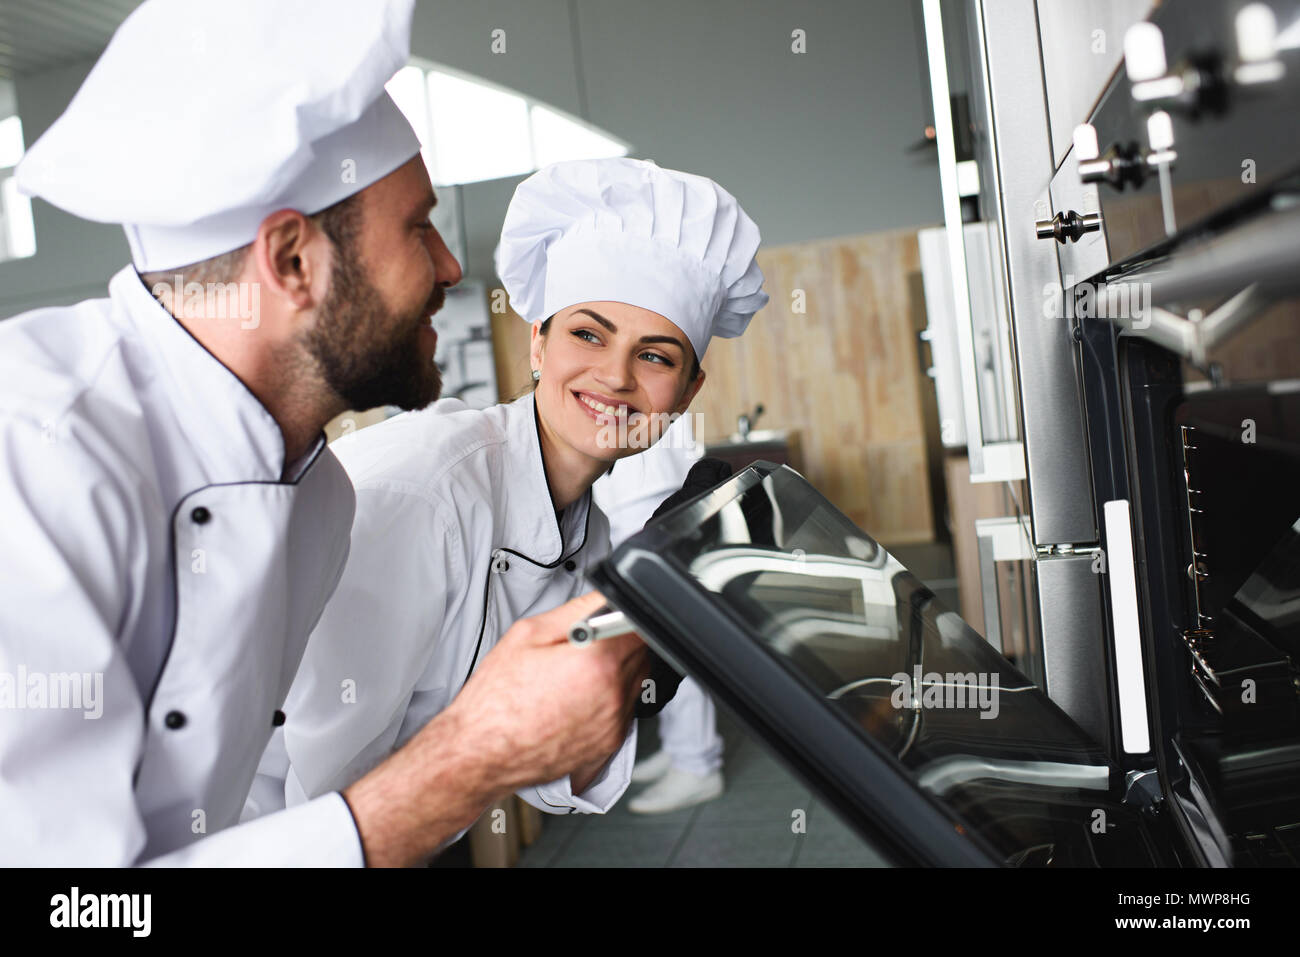 Professional chefs checking baling oven in kitchen Stock Photo